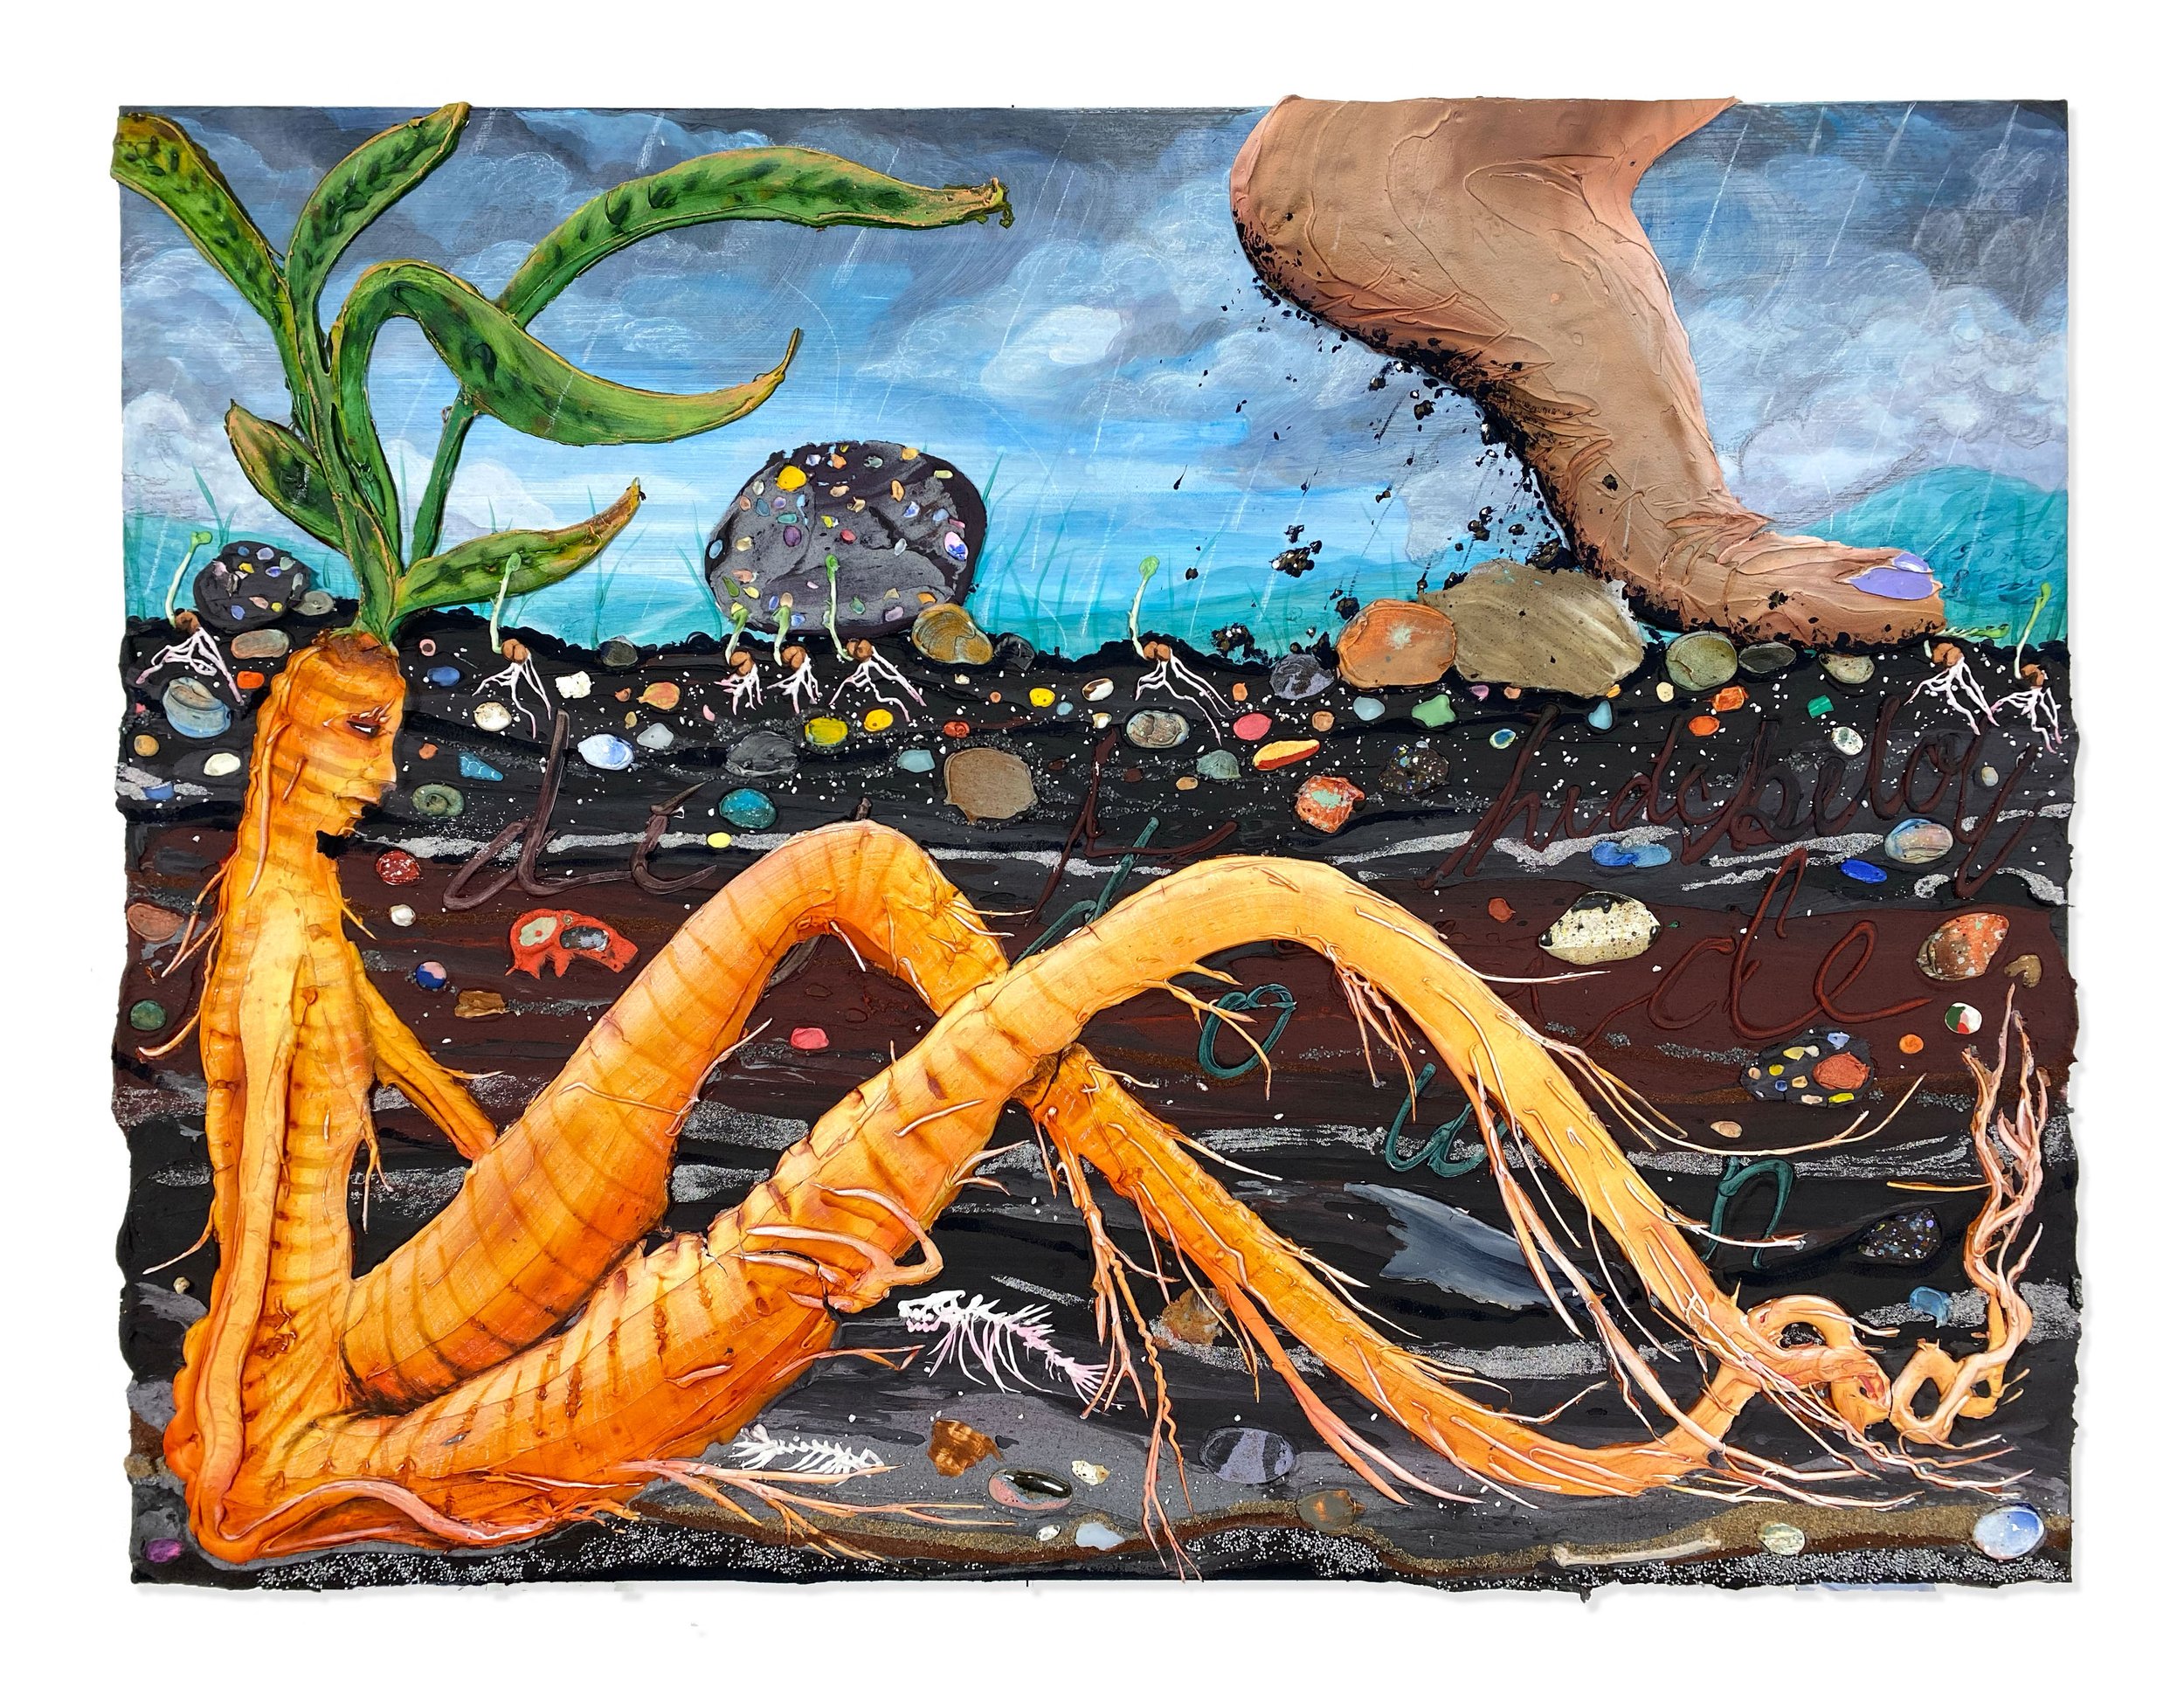   Barefoot In The Garden , 2021. Acrylic, pigment, flashe, pumice, sand, ceramic, rocks from Lake Michigan, and oil stick on canvas, 30.25 x 40.25 x 1.25 in. (76.9 x 102.2 x 3.2 cm) 